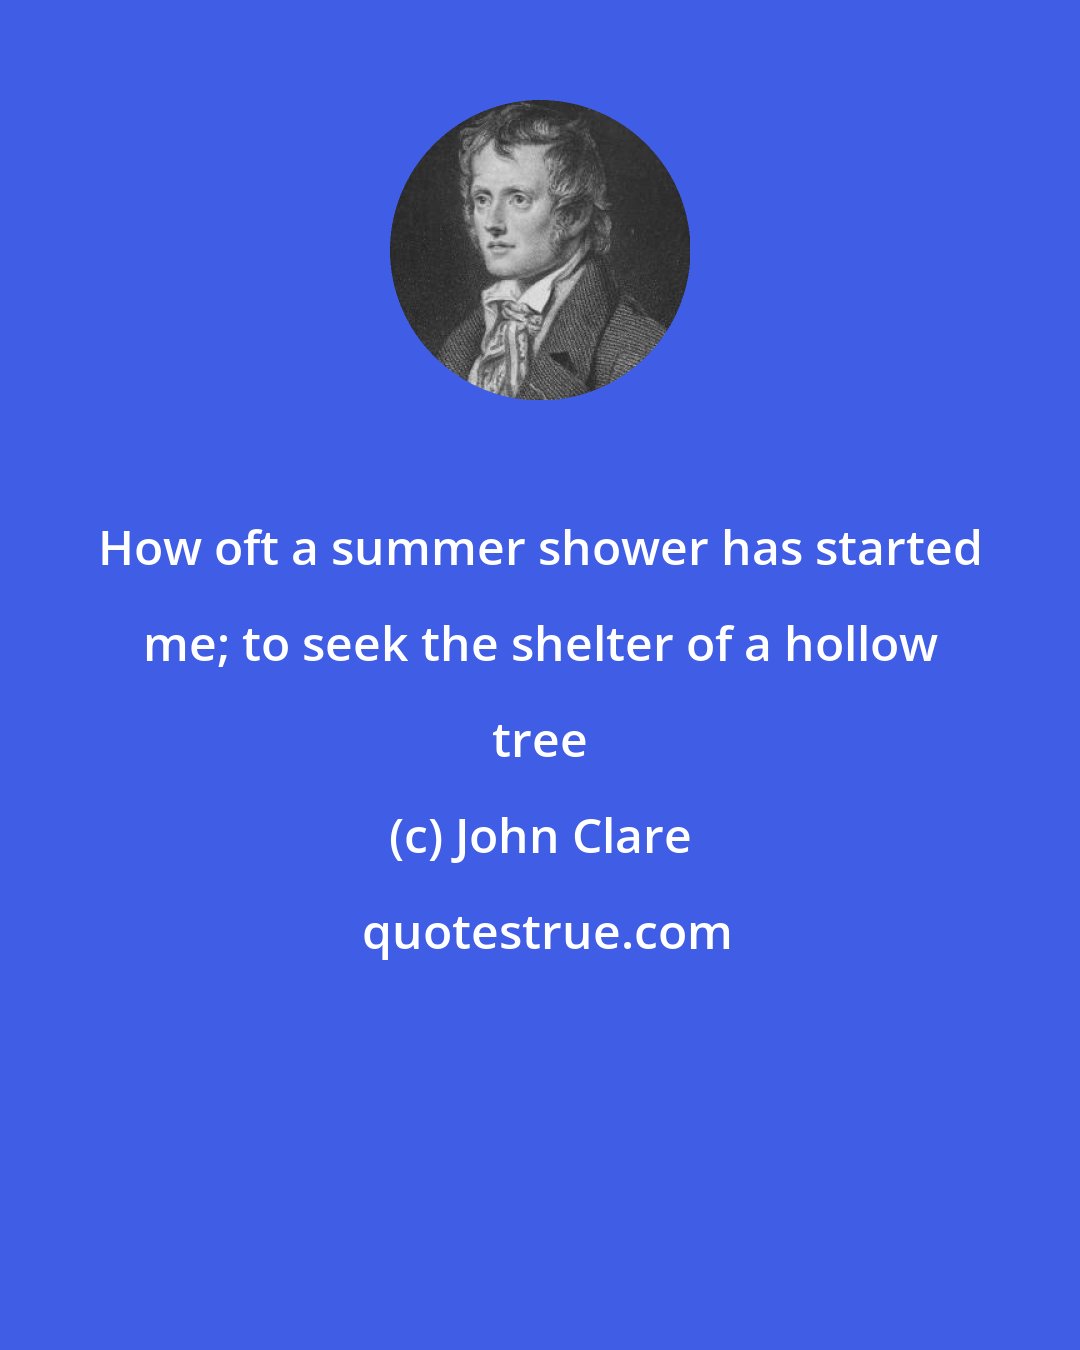 John Clare: How oft a summer shower has started me; to seek the shelter of a hollow tree